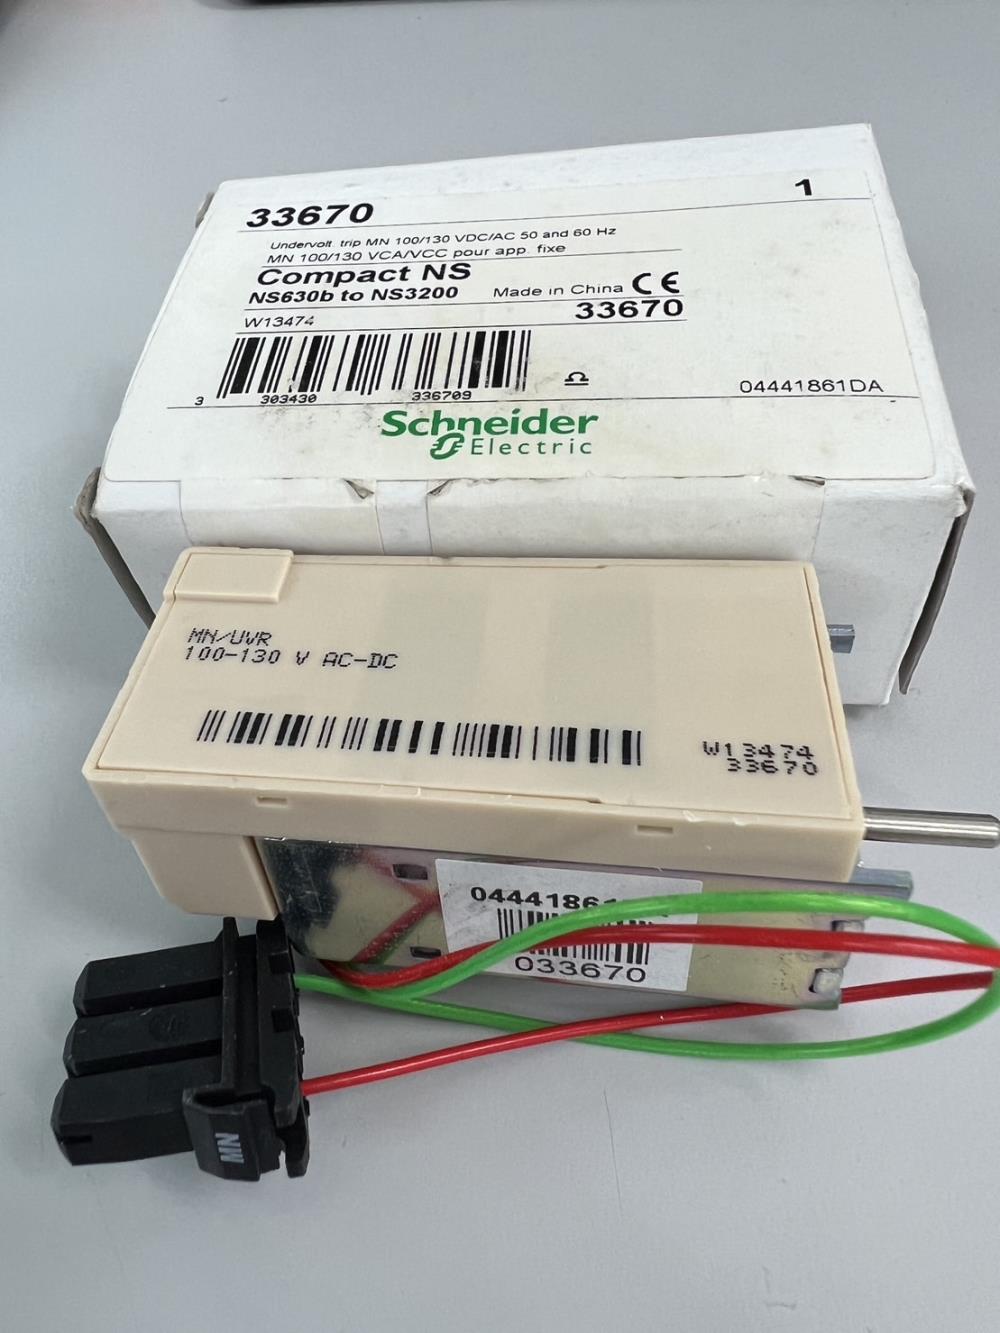 Schneider Electric 33670 Under voltage,Schneider Electric 33670 Under voltage Under voltage release MN - 100..130 V DC/AC 50/60Hz For Fixed breaker Masterpact NW,Schneider Electric 33670 Under voltage,Automation and Electronics/Access Control Systems